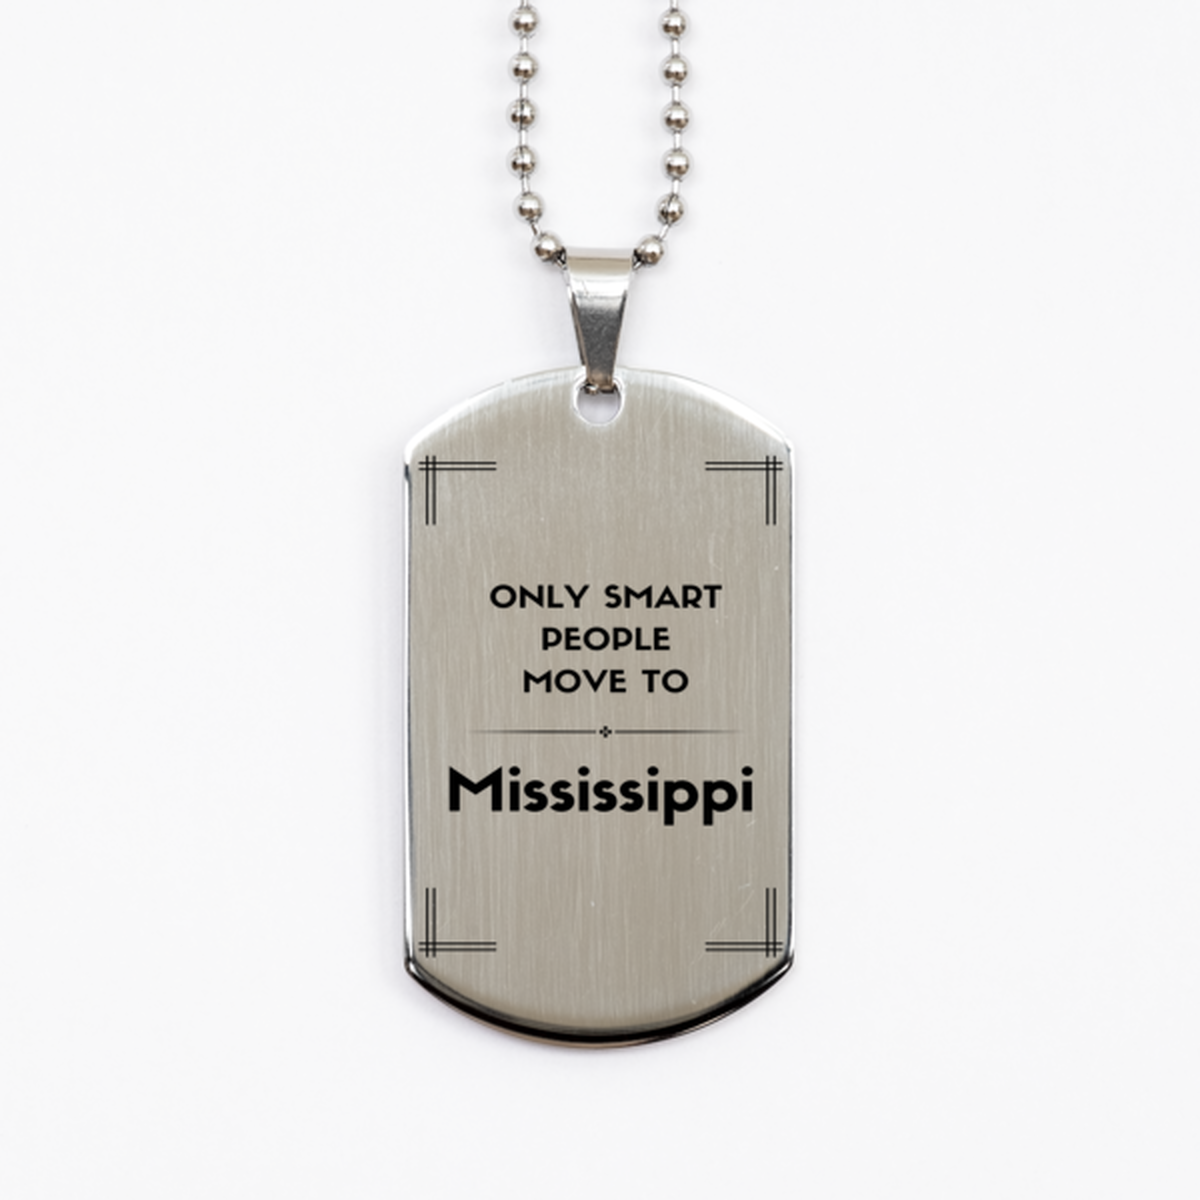 Only smart people move to Mississippi Silver Dog Tag, Gag Gifts For Mississippi, Move to Mississippi Gifts for Friends Coworker Funny Saying Quote